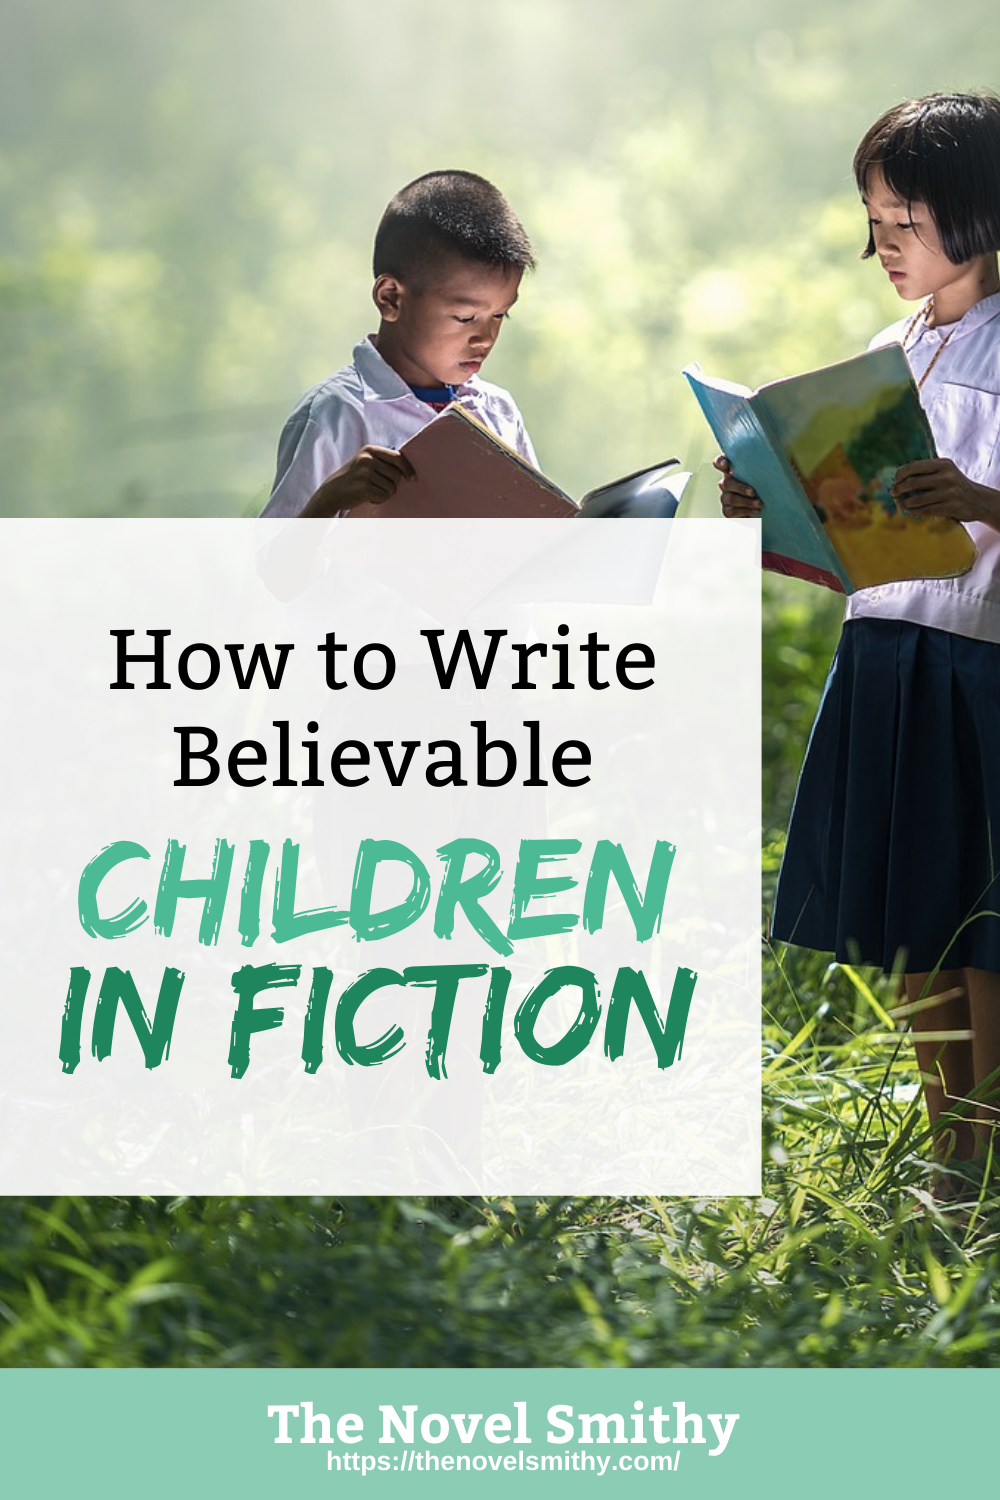 How to Write Believable Children in Fiction